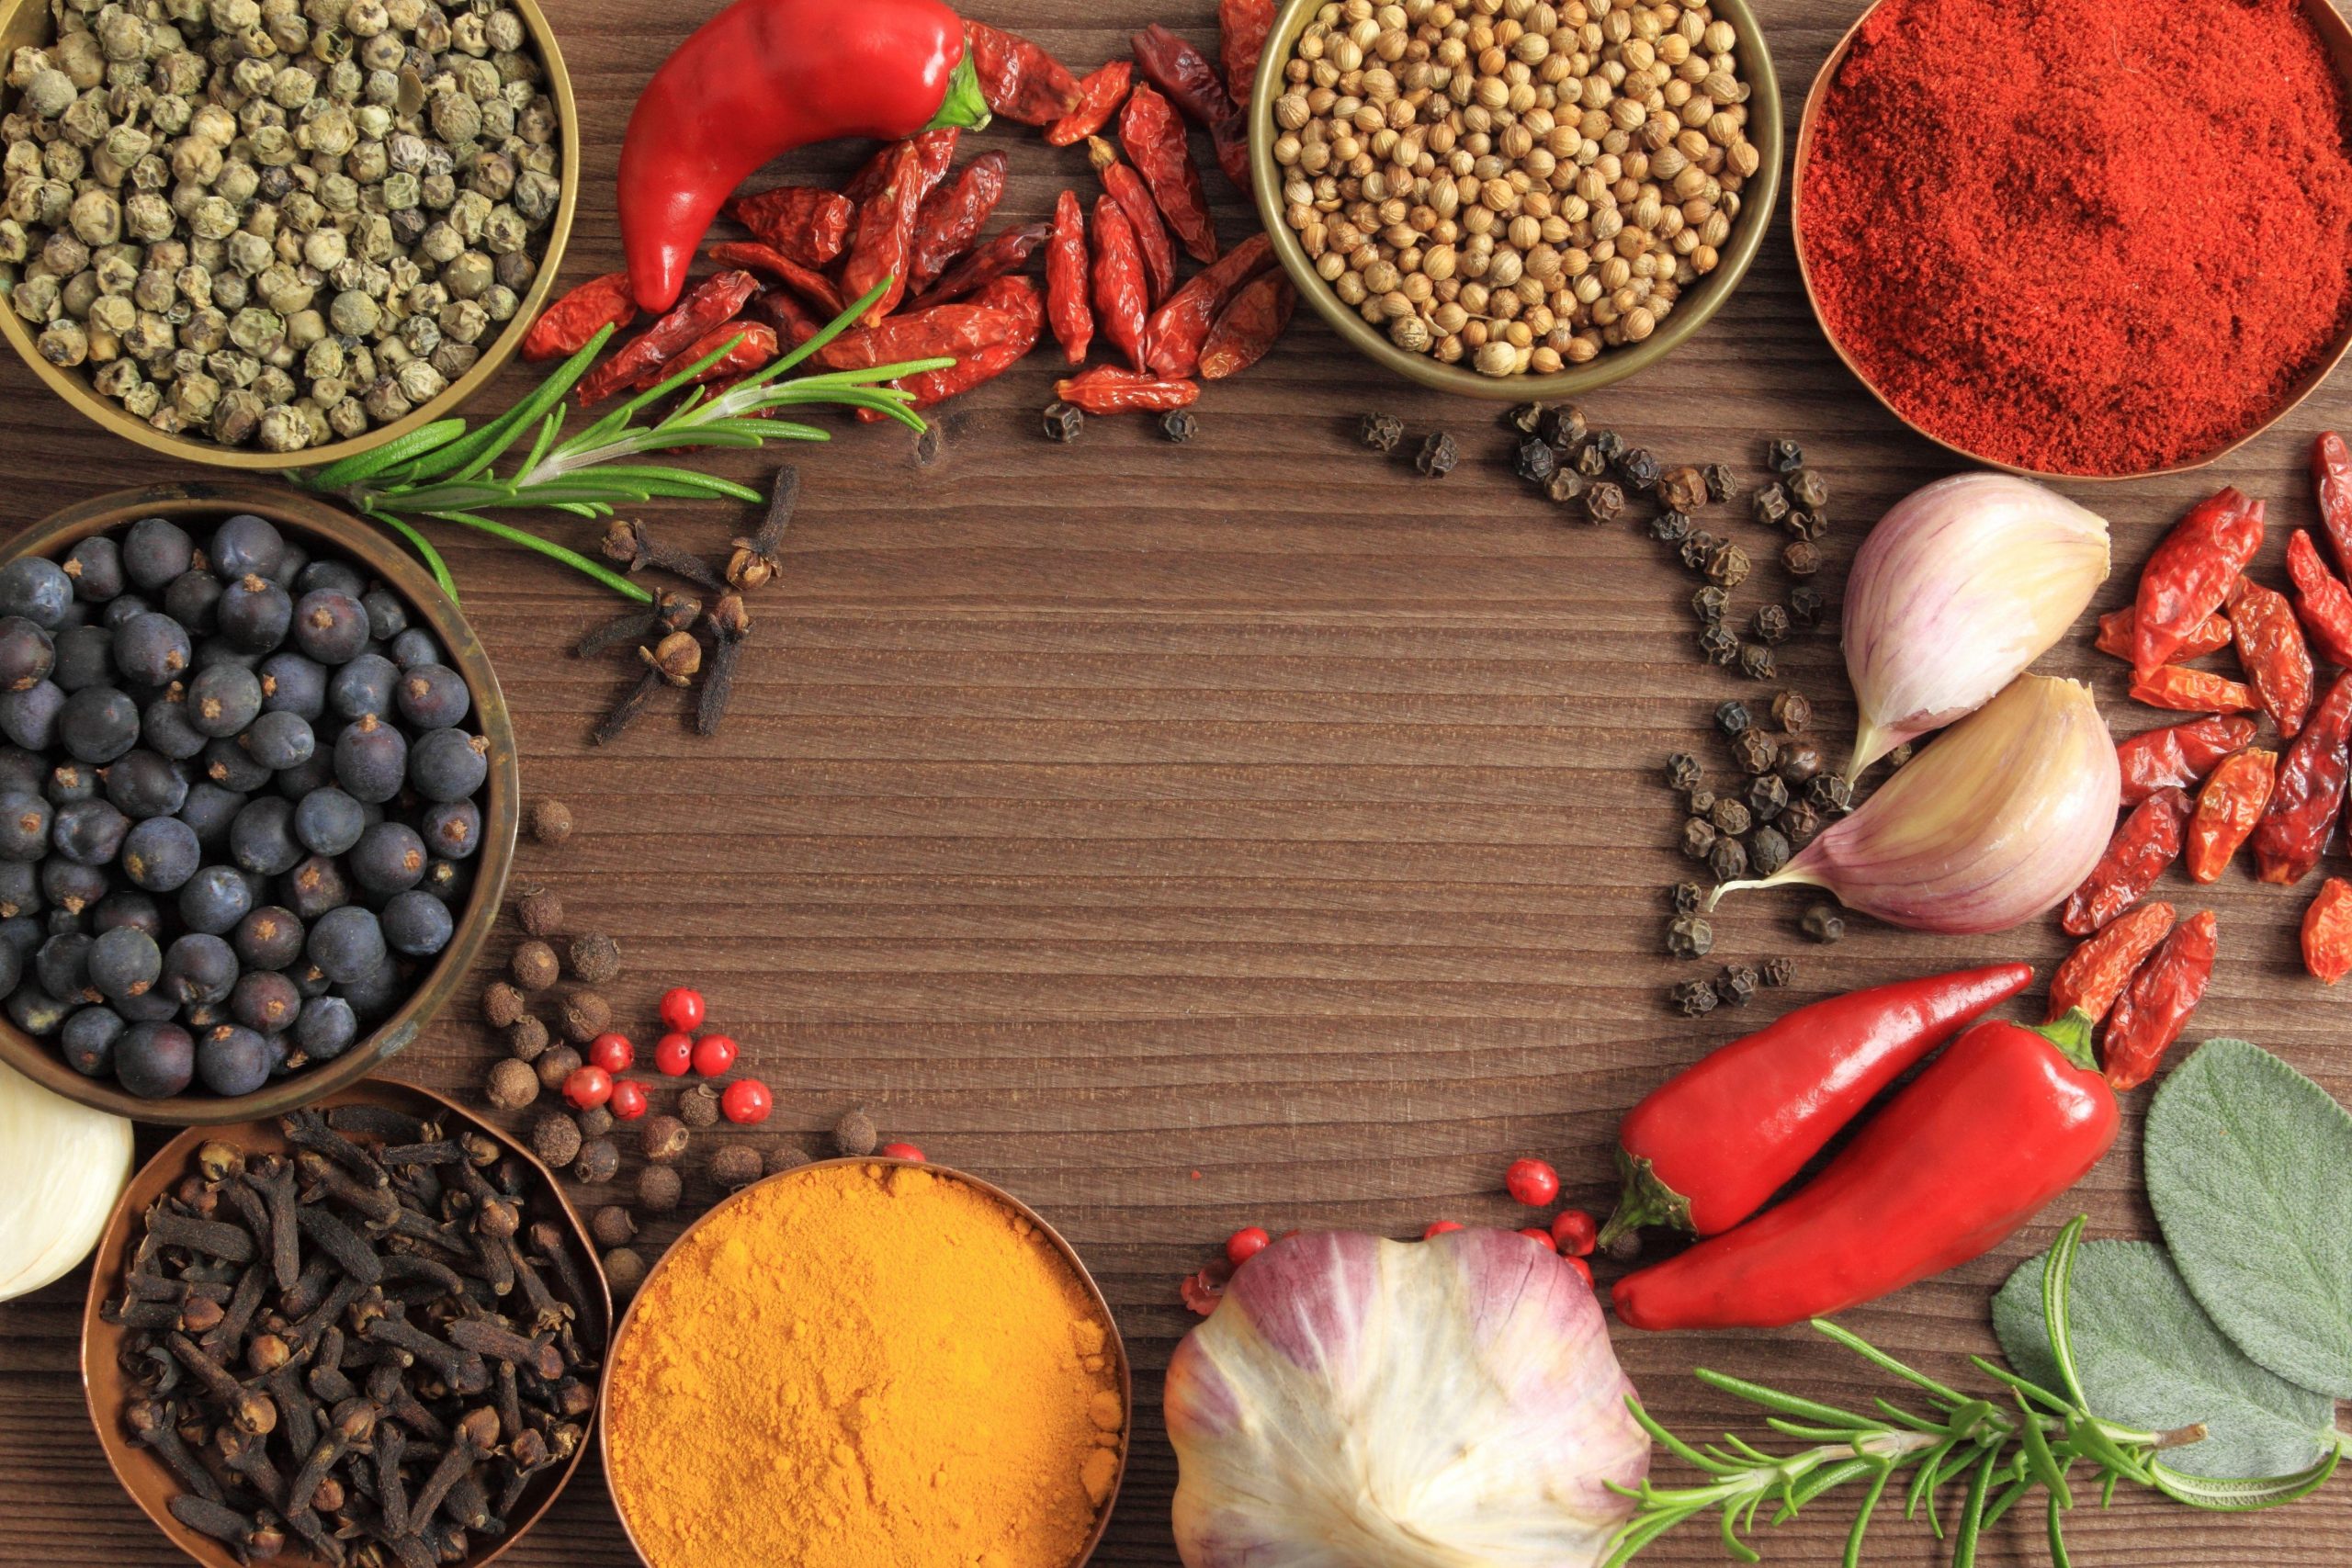 Organic Spices and Herbs: Nature’s Gifts for Your Table